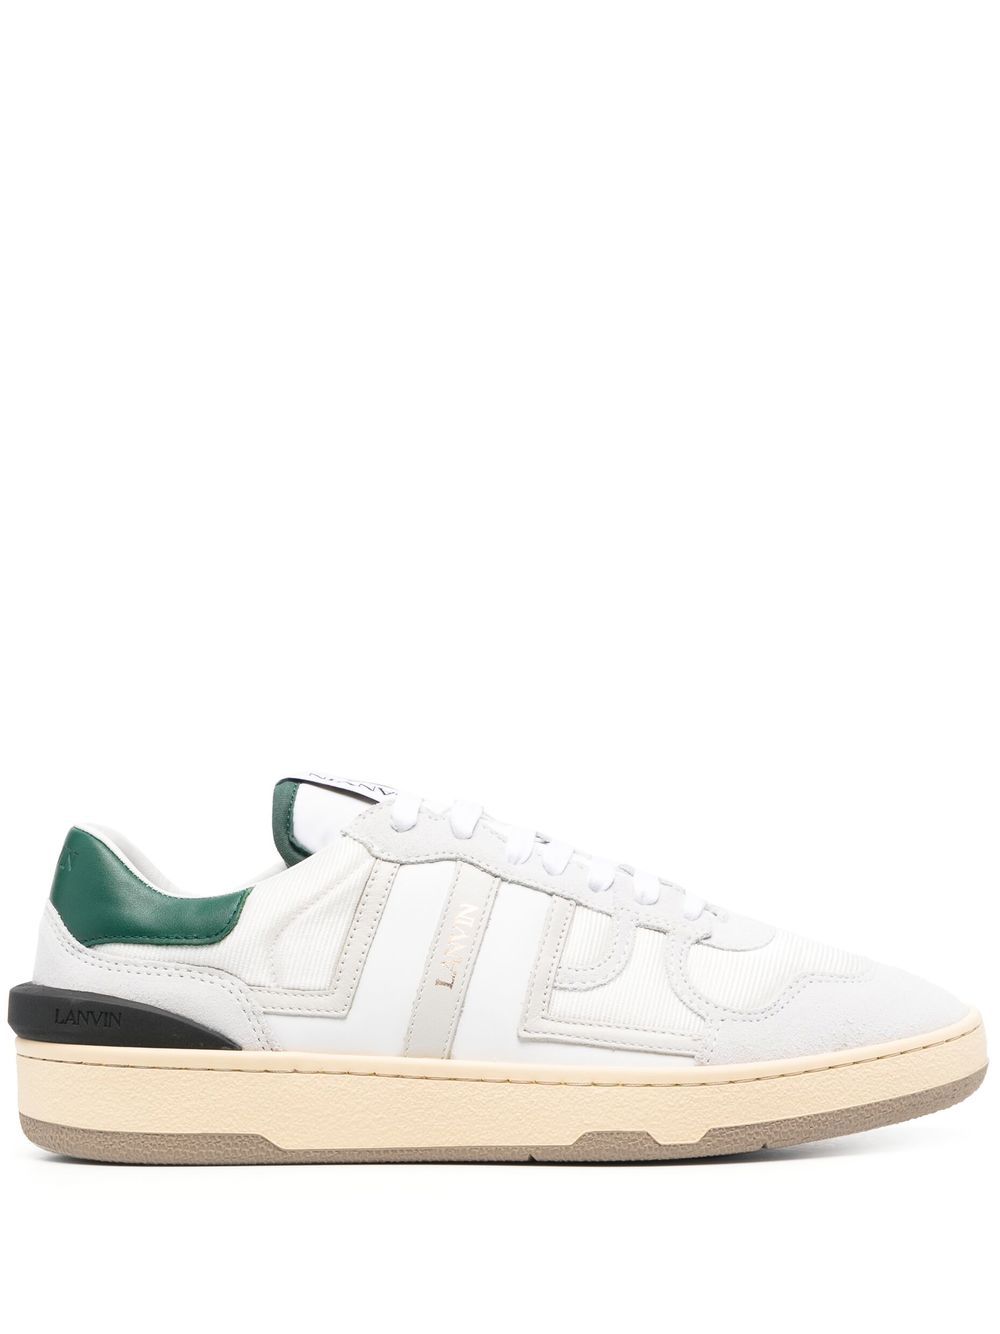 Lanvin Clay Panelled low-top Sneakers - Farfetch